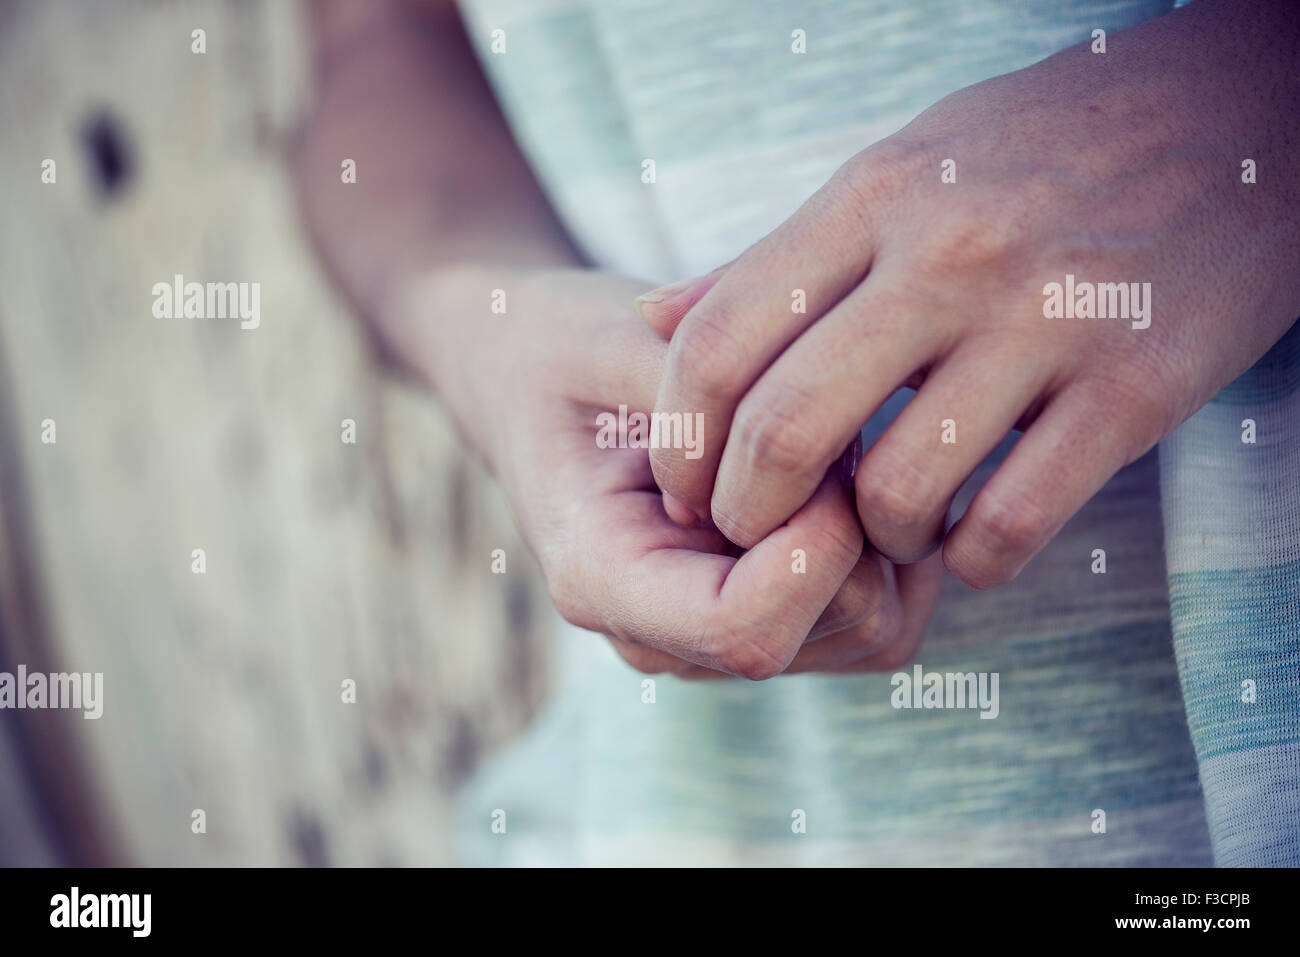 Woman's clasped hands, close-up Stock Photo